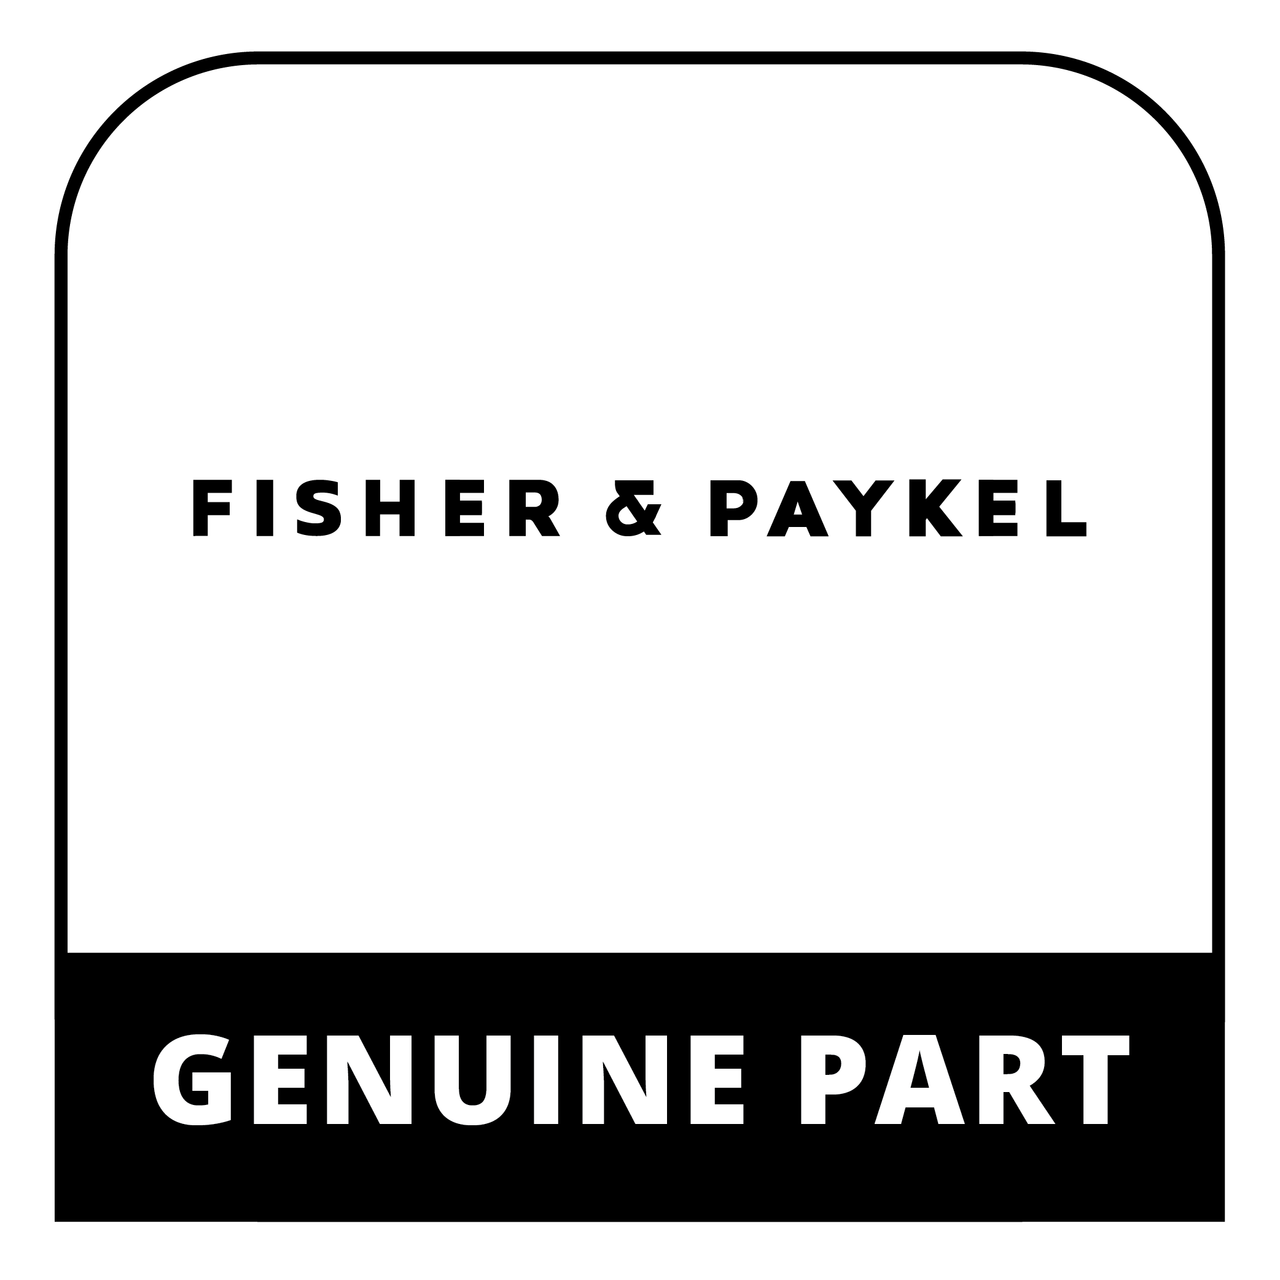 Fisher & Paykel 220802 - Hb 1/4-20 X 1-1/2 X 1 Zn - Genuine Fisher & Paykel (DCS) Part